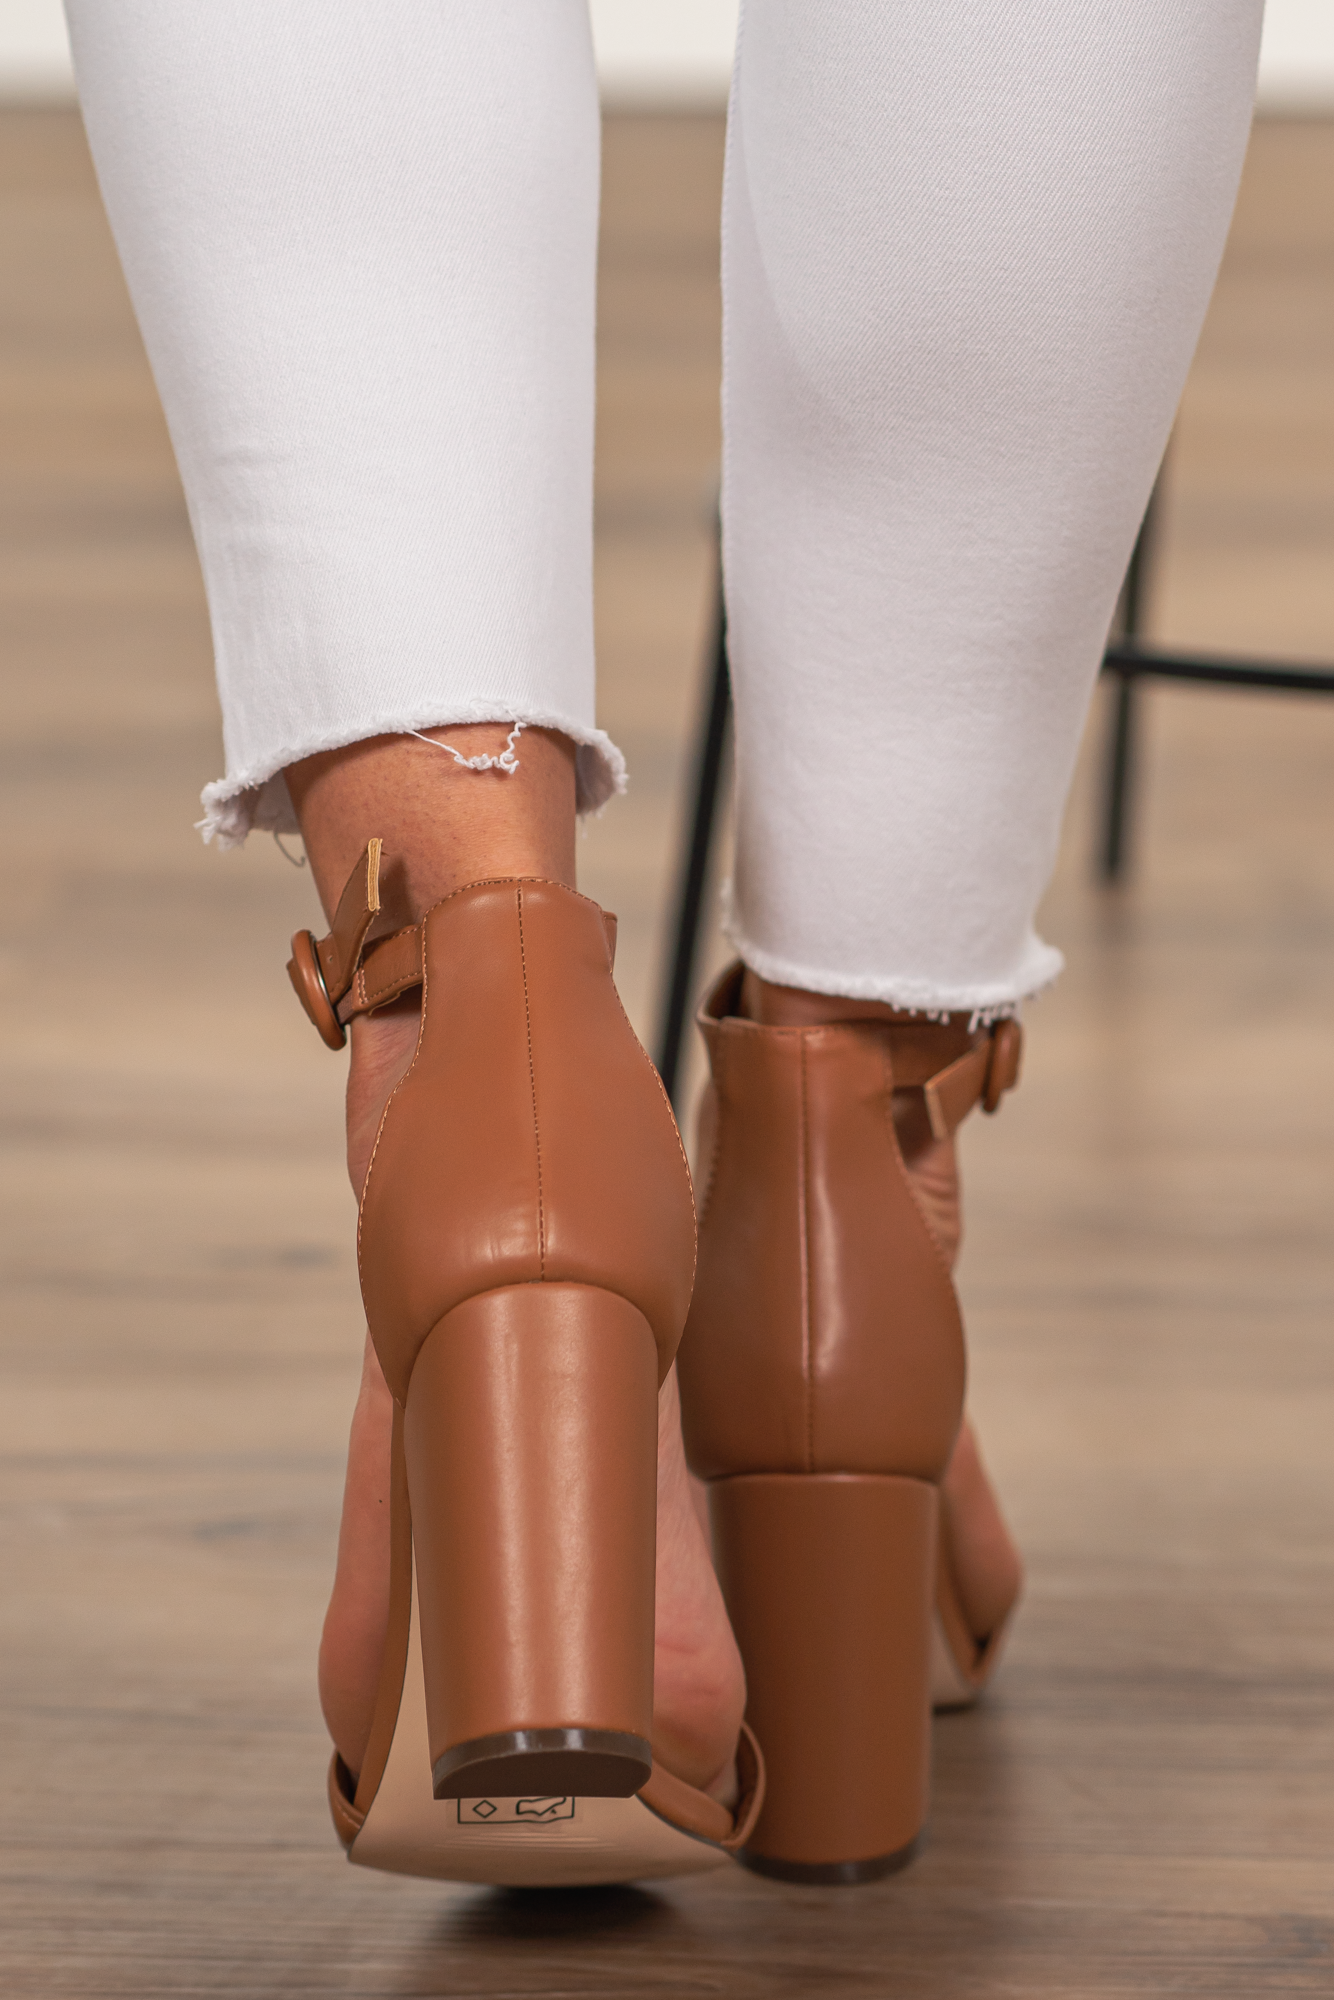 Chase & Chloe Suede Camel Color Lace Up Heels 2.5